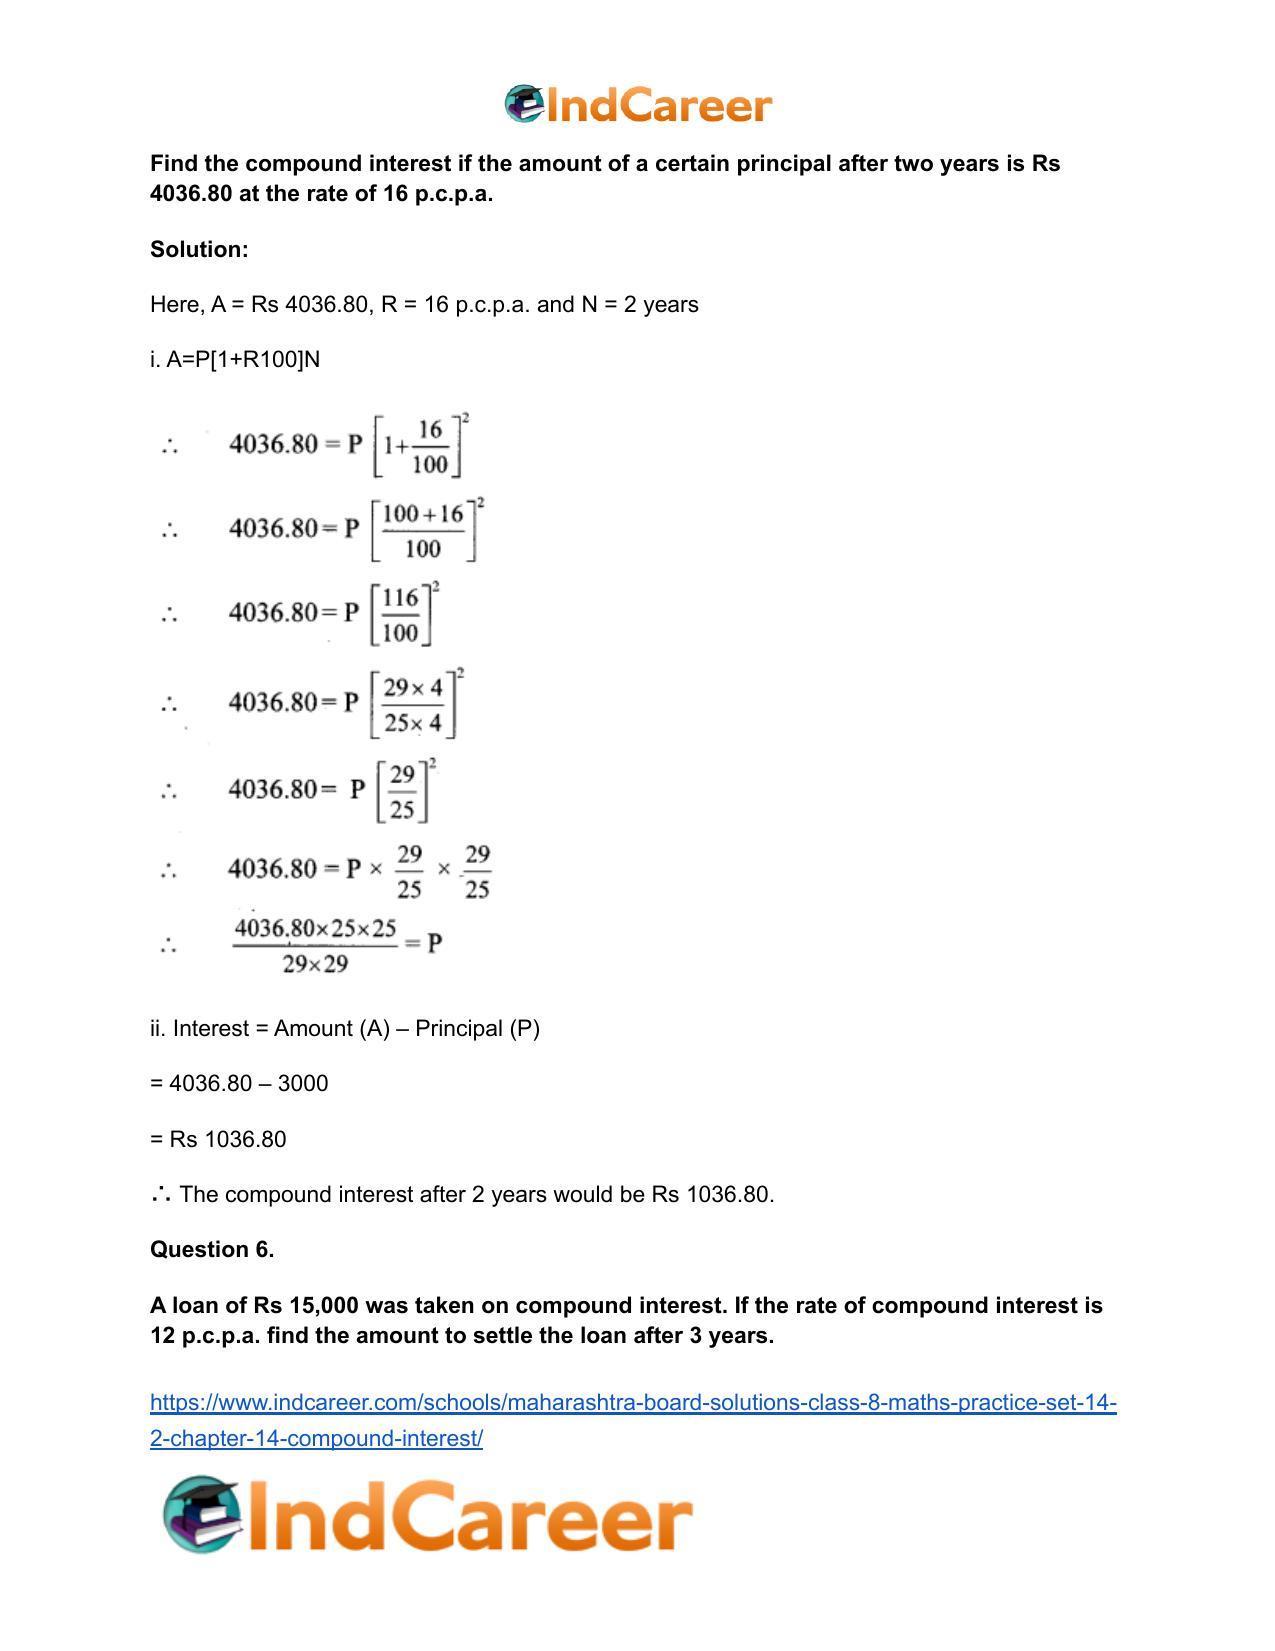 Maharashtra Board Solutions Class 8-Maths (Practice Set 14.2): Chapter 14- Compound Interest - Page 7